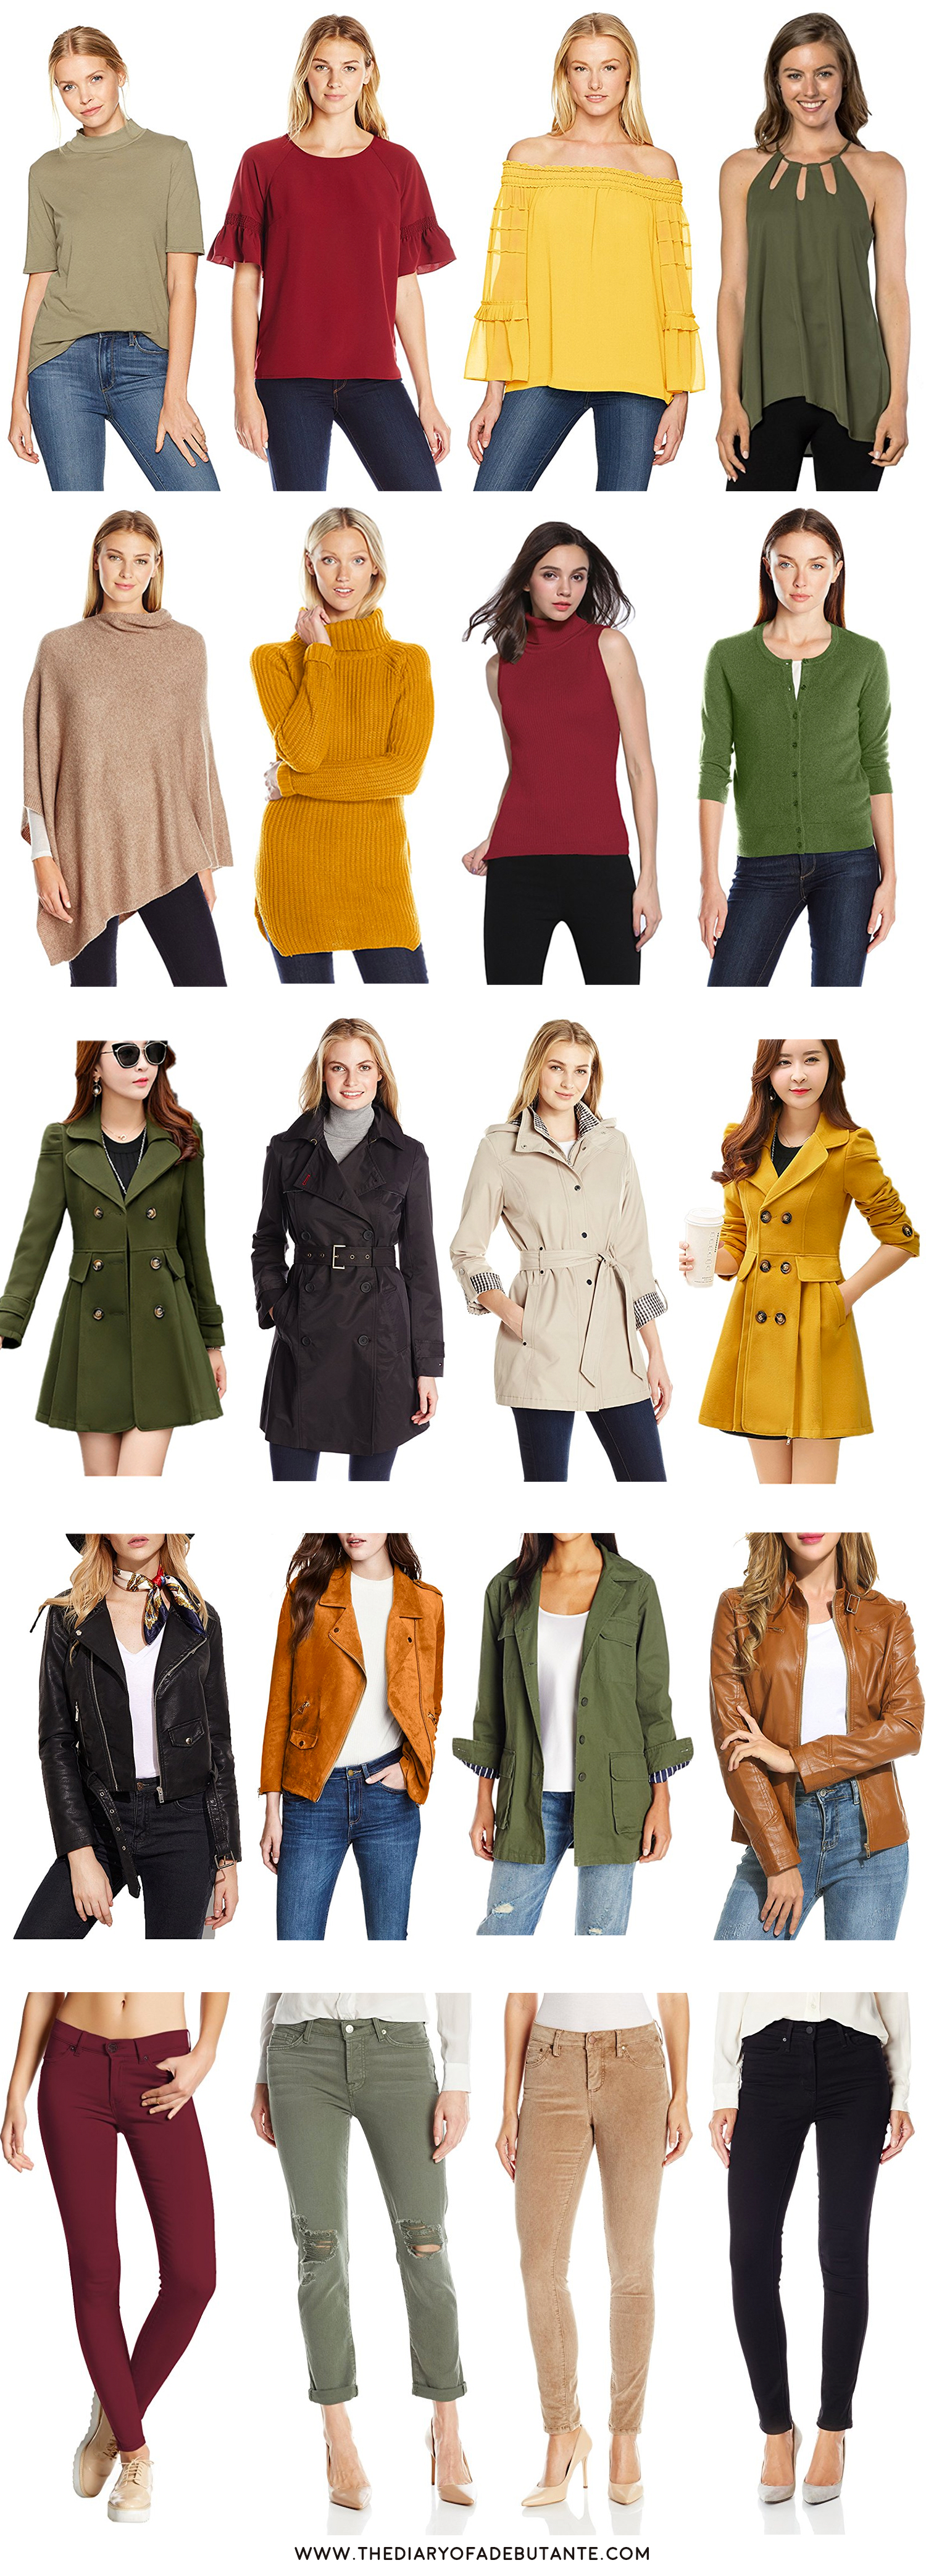 Fall Fashion Colors 2017: What's Trending in Clothing and Accessories | Amazon's top fall fashion finds under $100 by fashion blogger Stephanie Ziajka from Diary of a Debutante